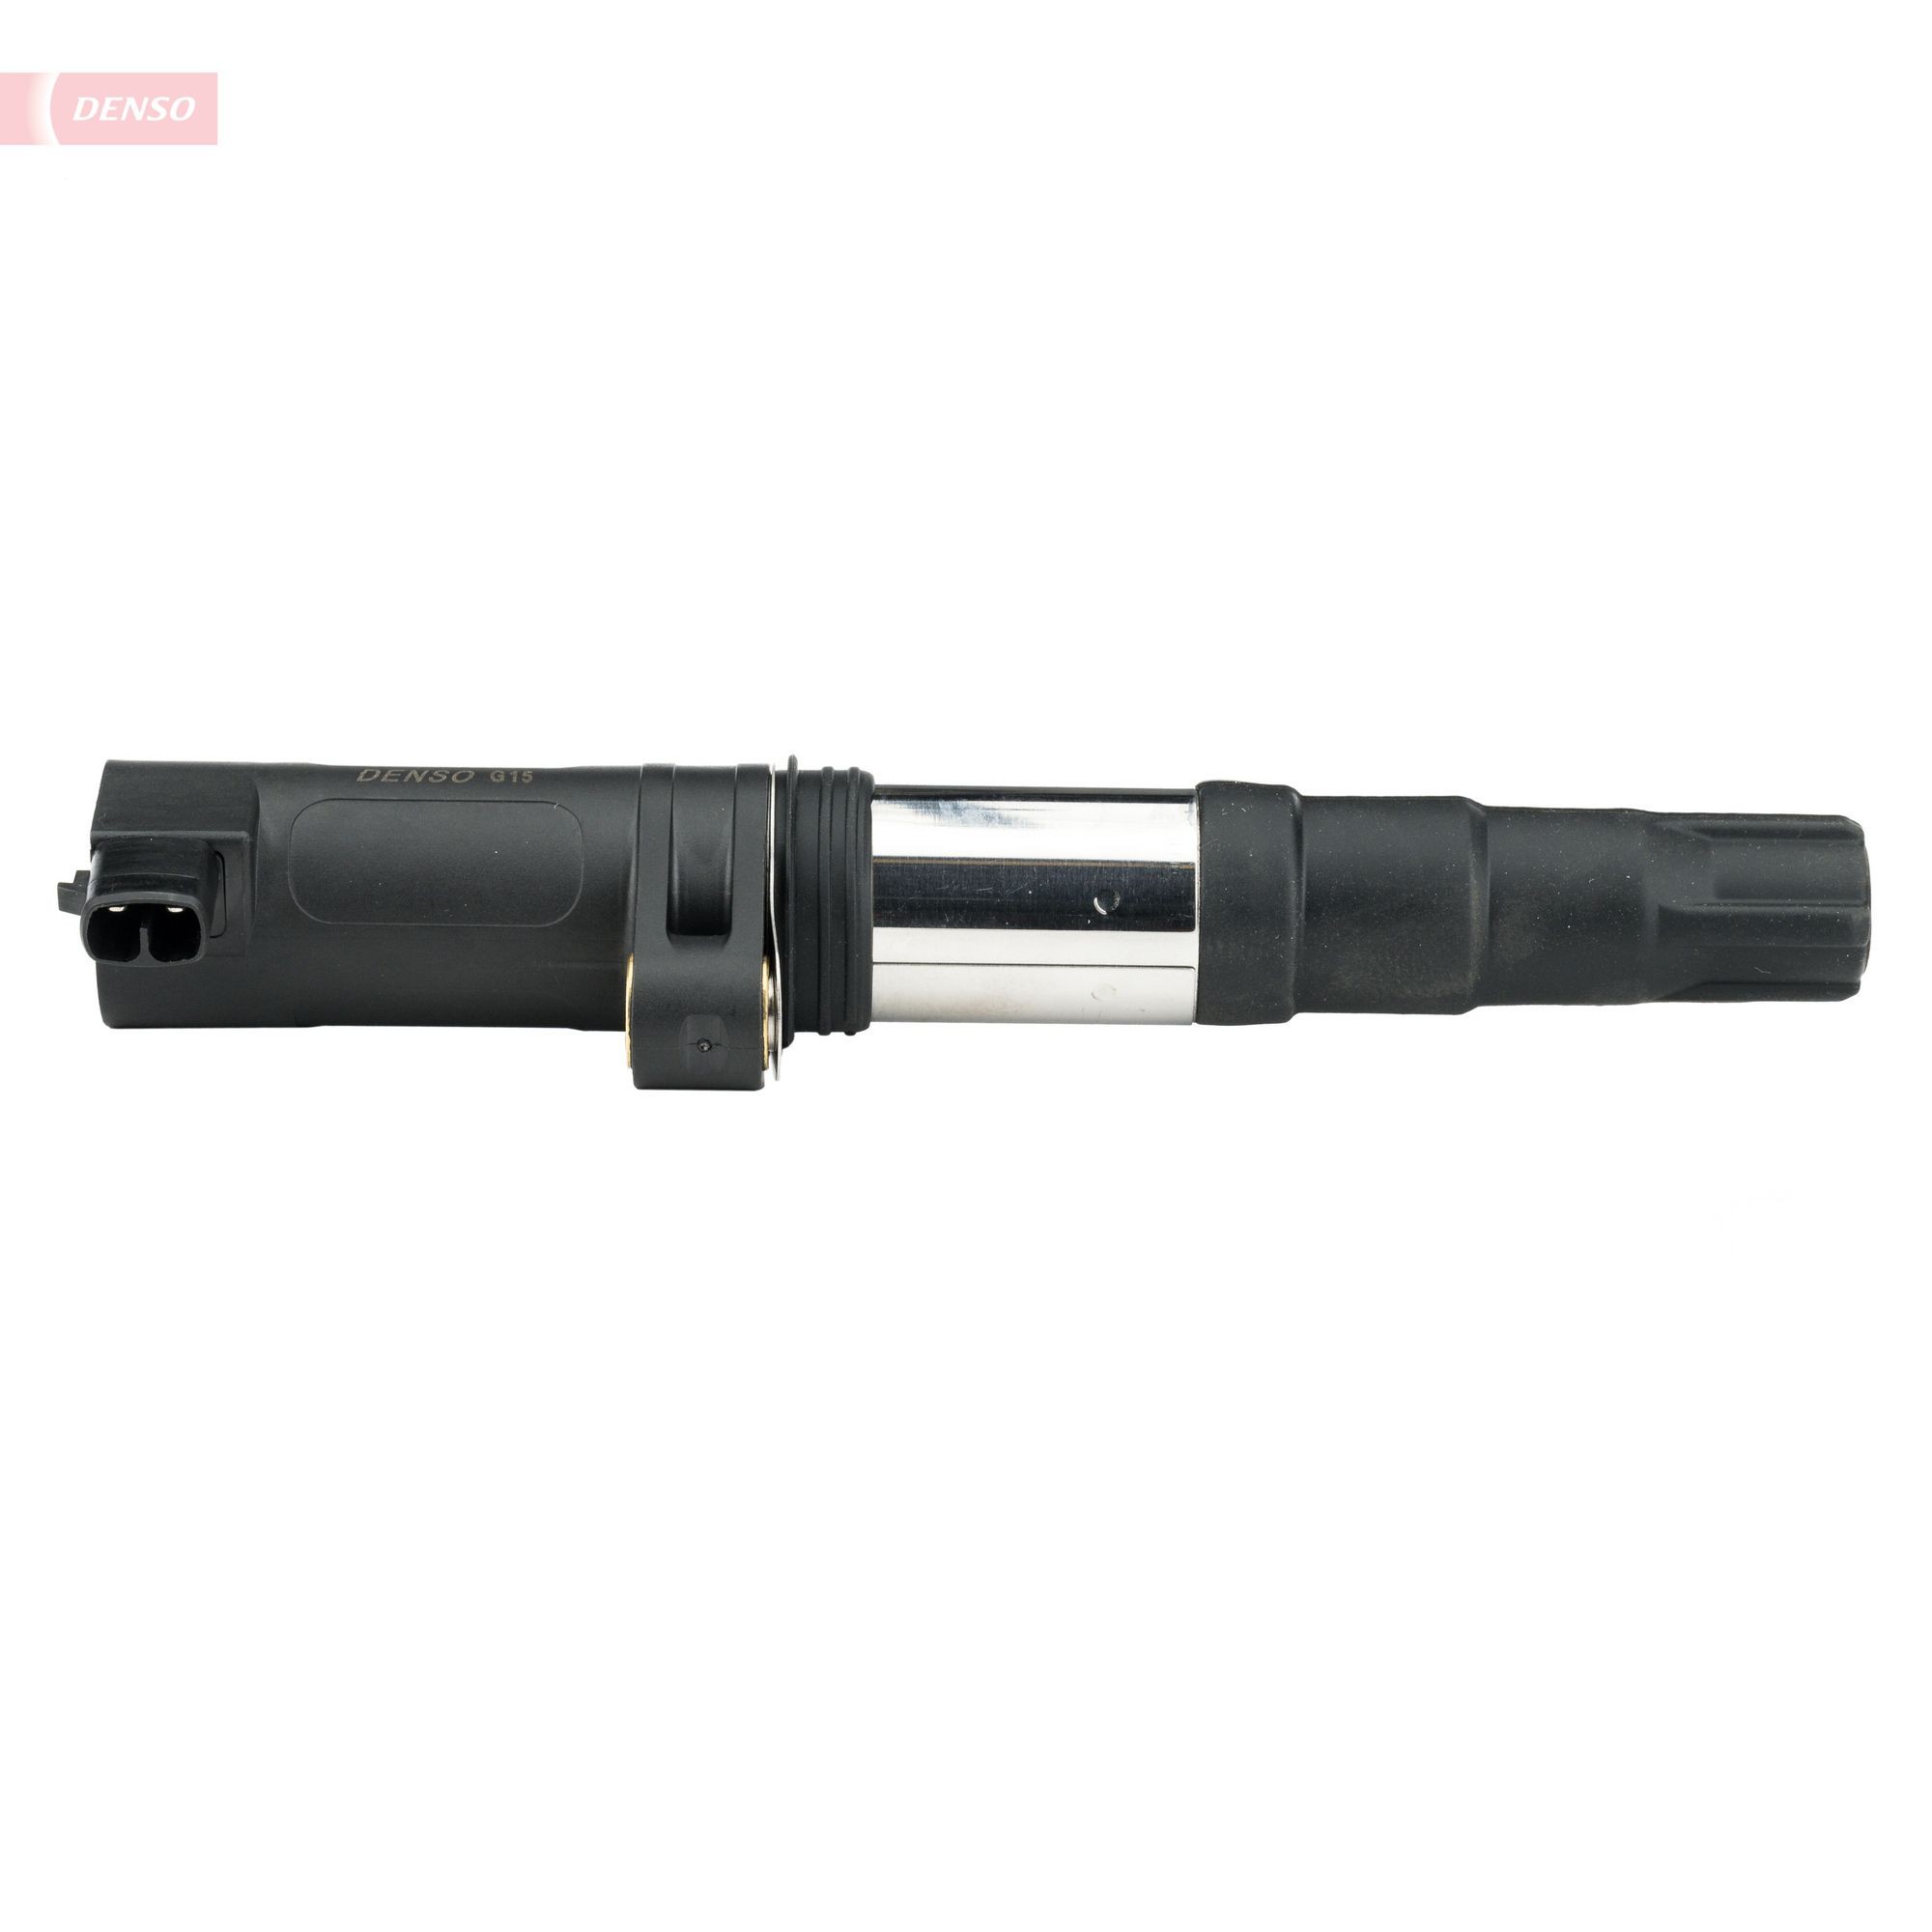 DENSO DIC-0213 Ignition coil 1338-00